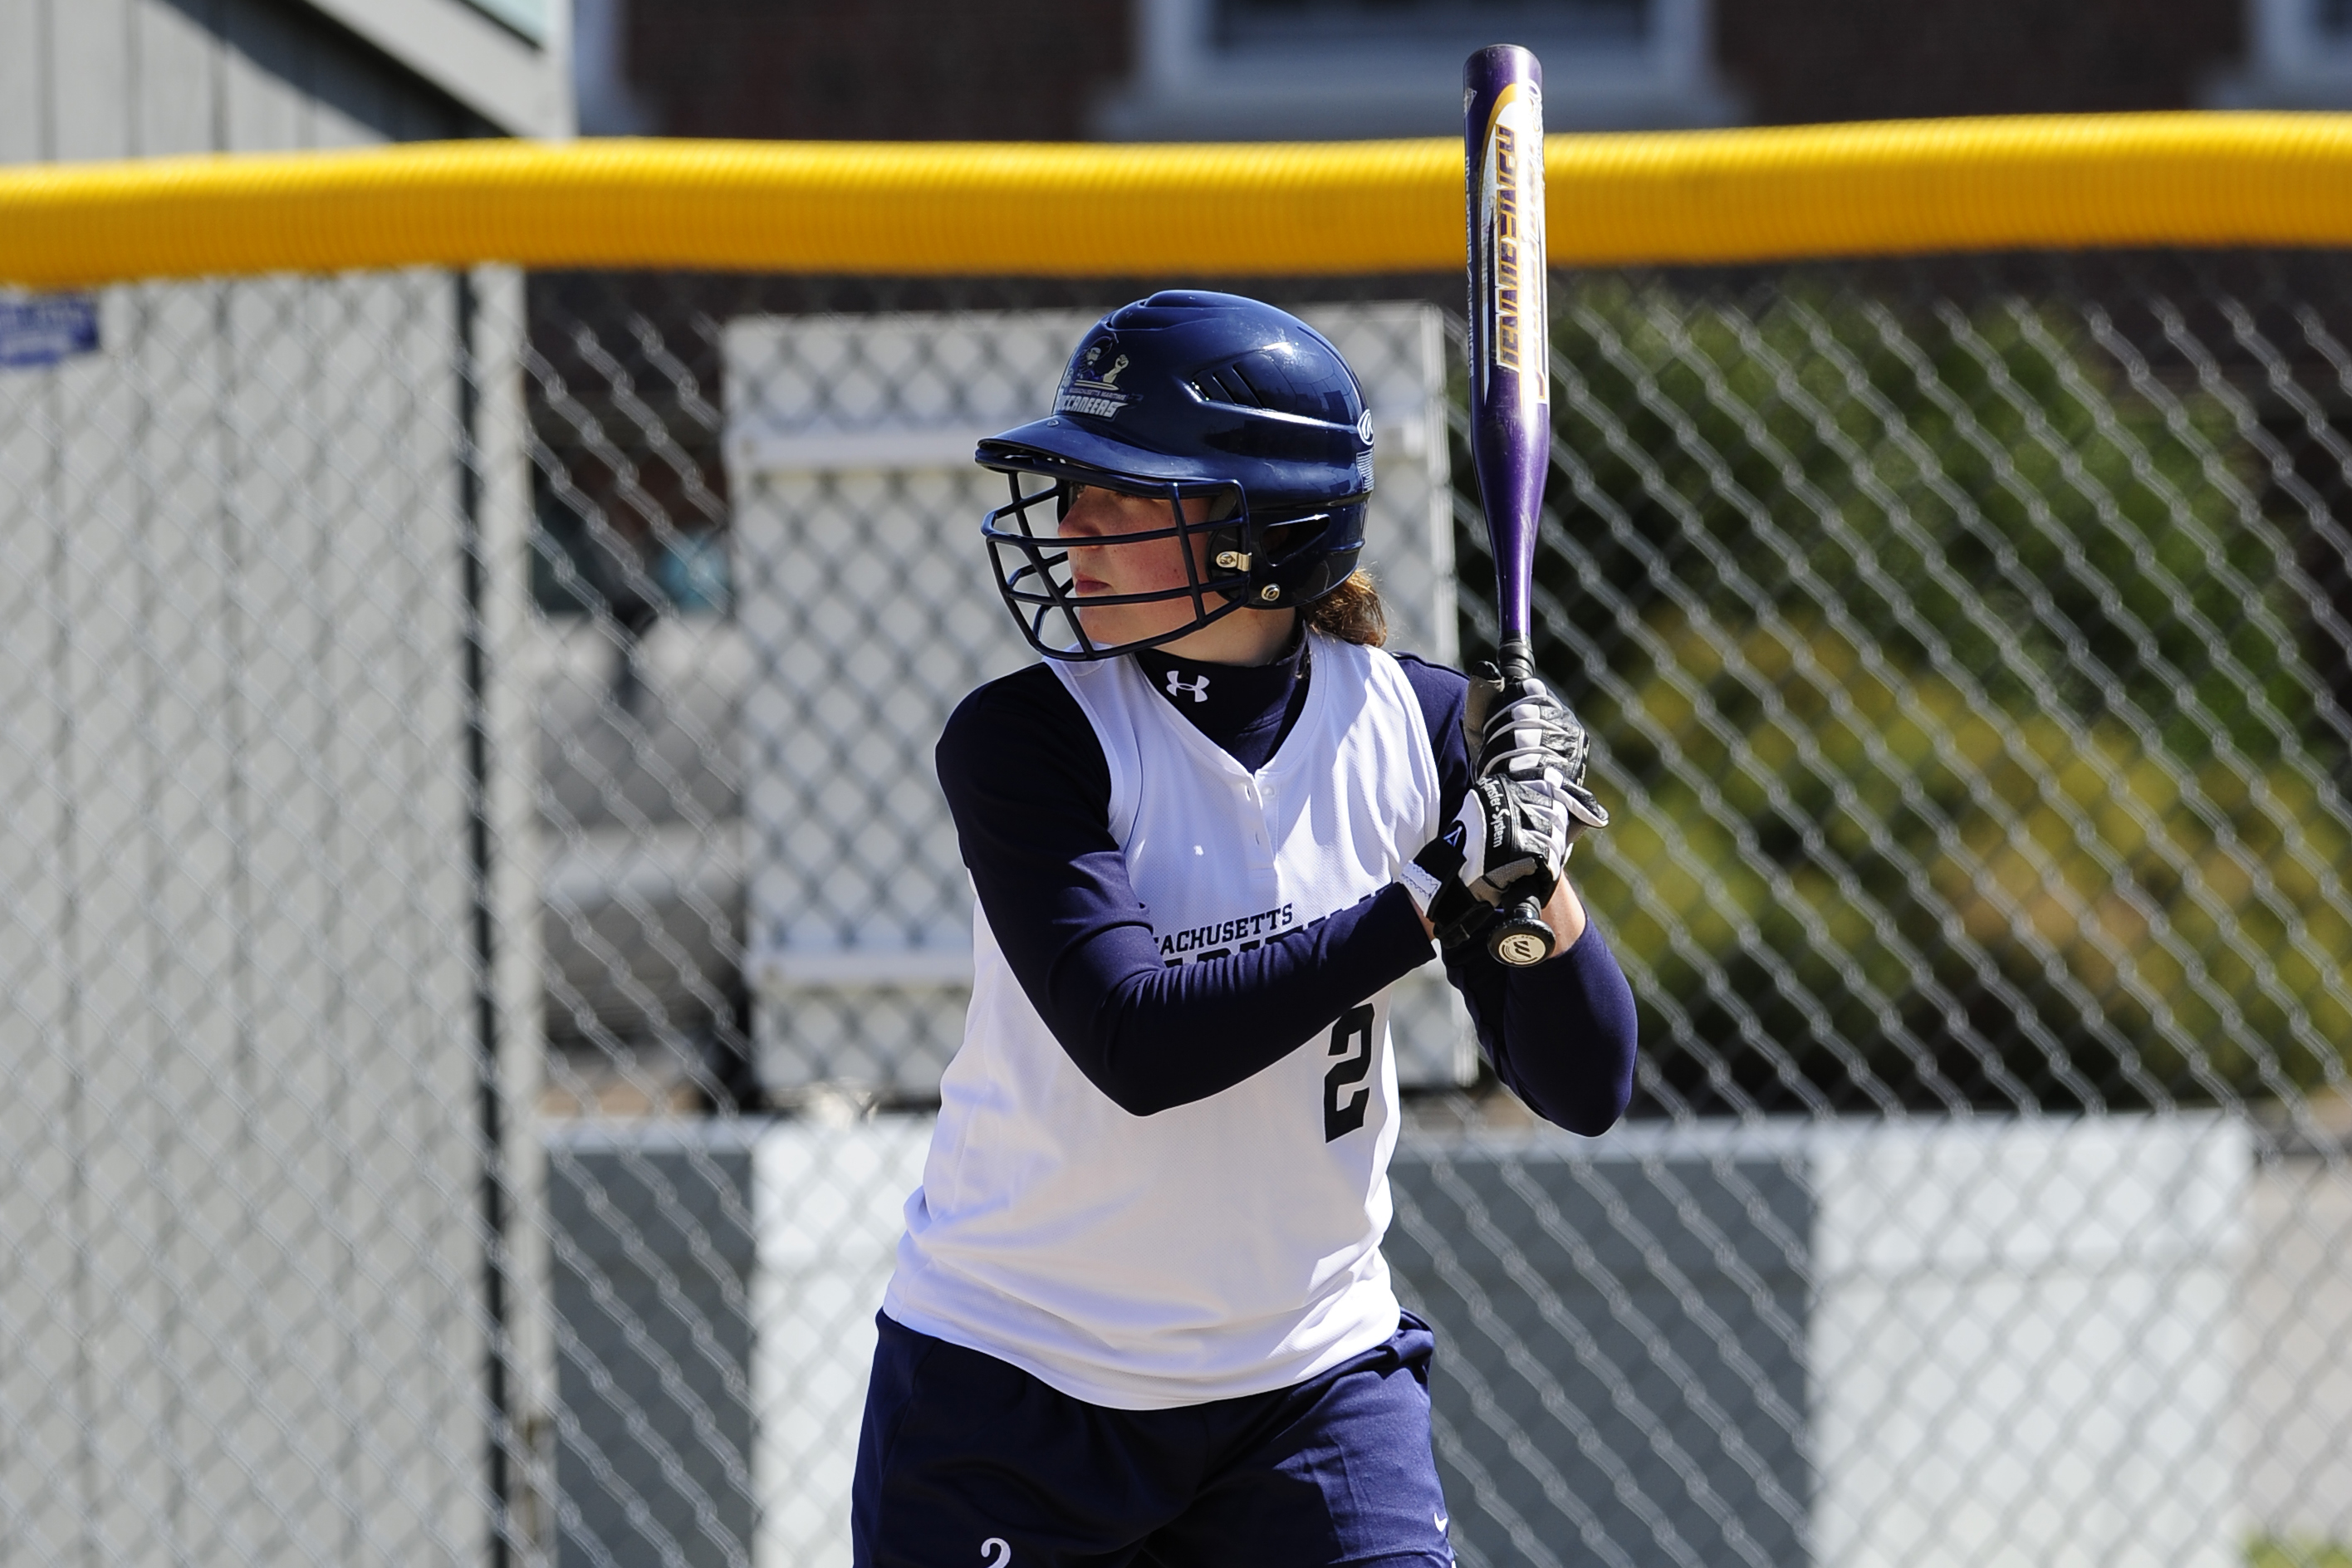 Beaulieu, McLaughlin Drive In Six Runs Each As Softball Makes Triumphant Return To Competition With 15-1, 14-5 Non-League Sweep Of Lyndon State